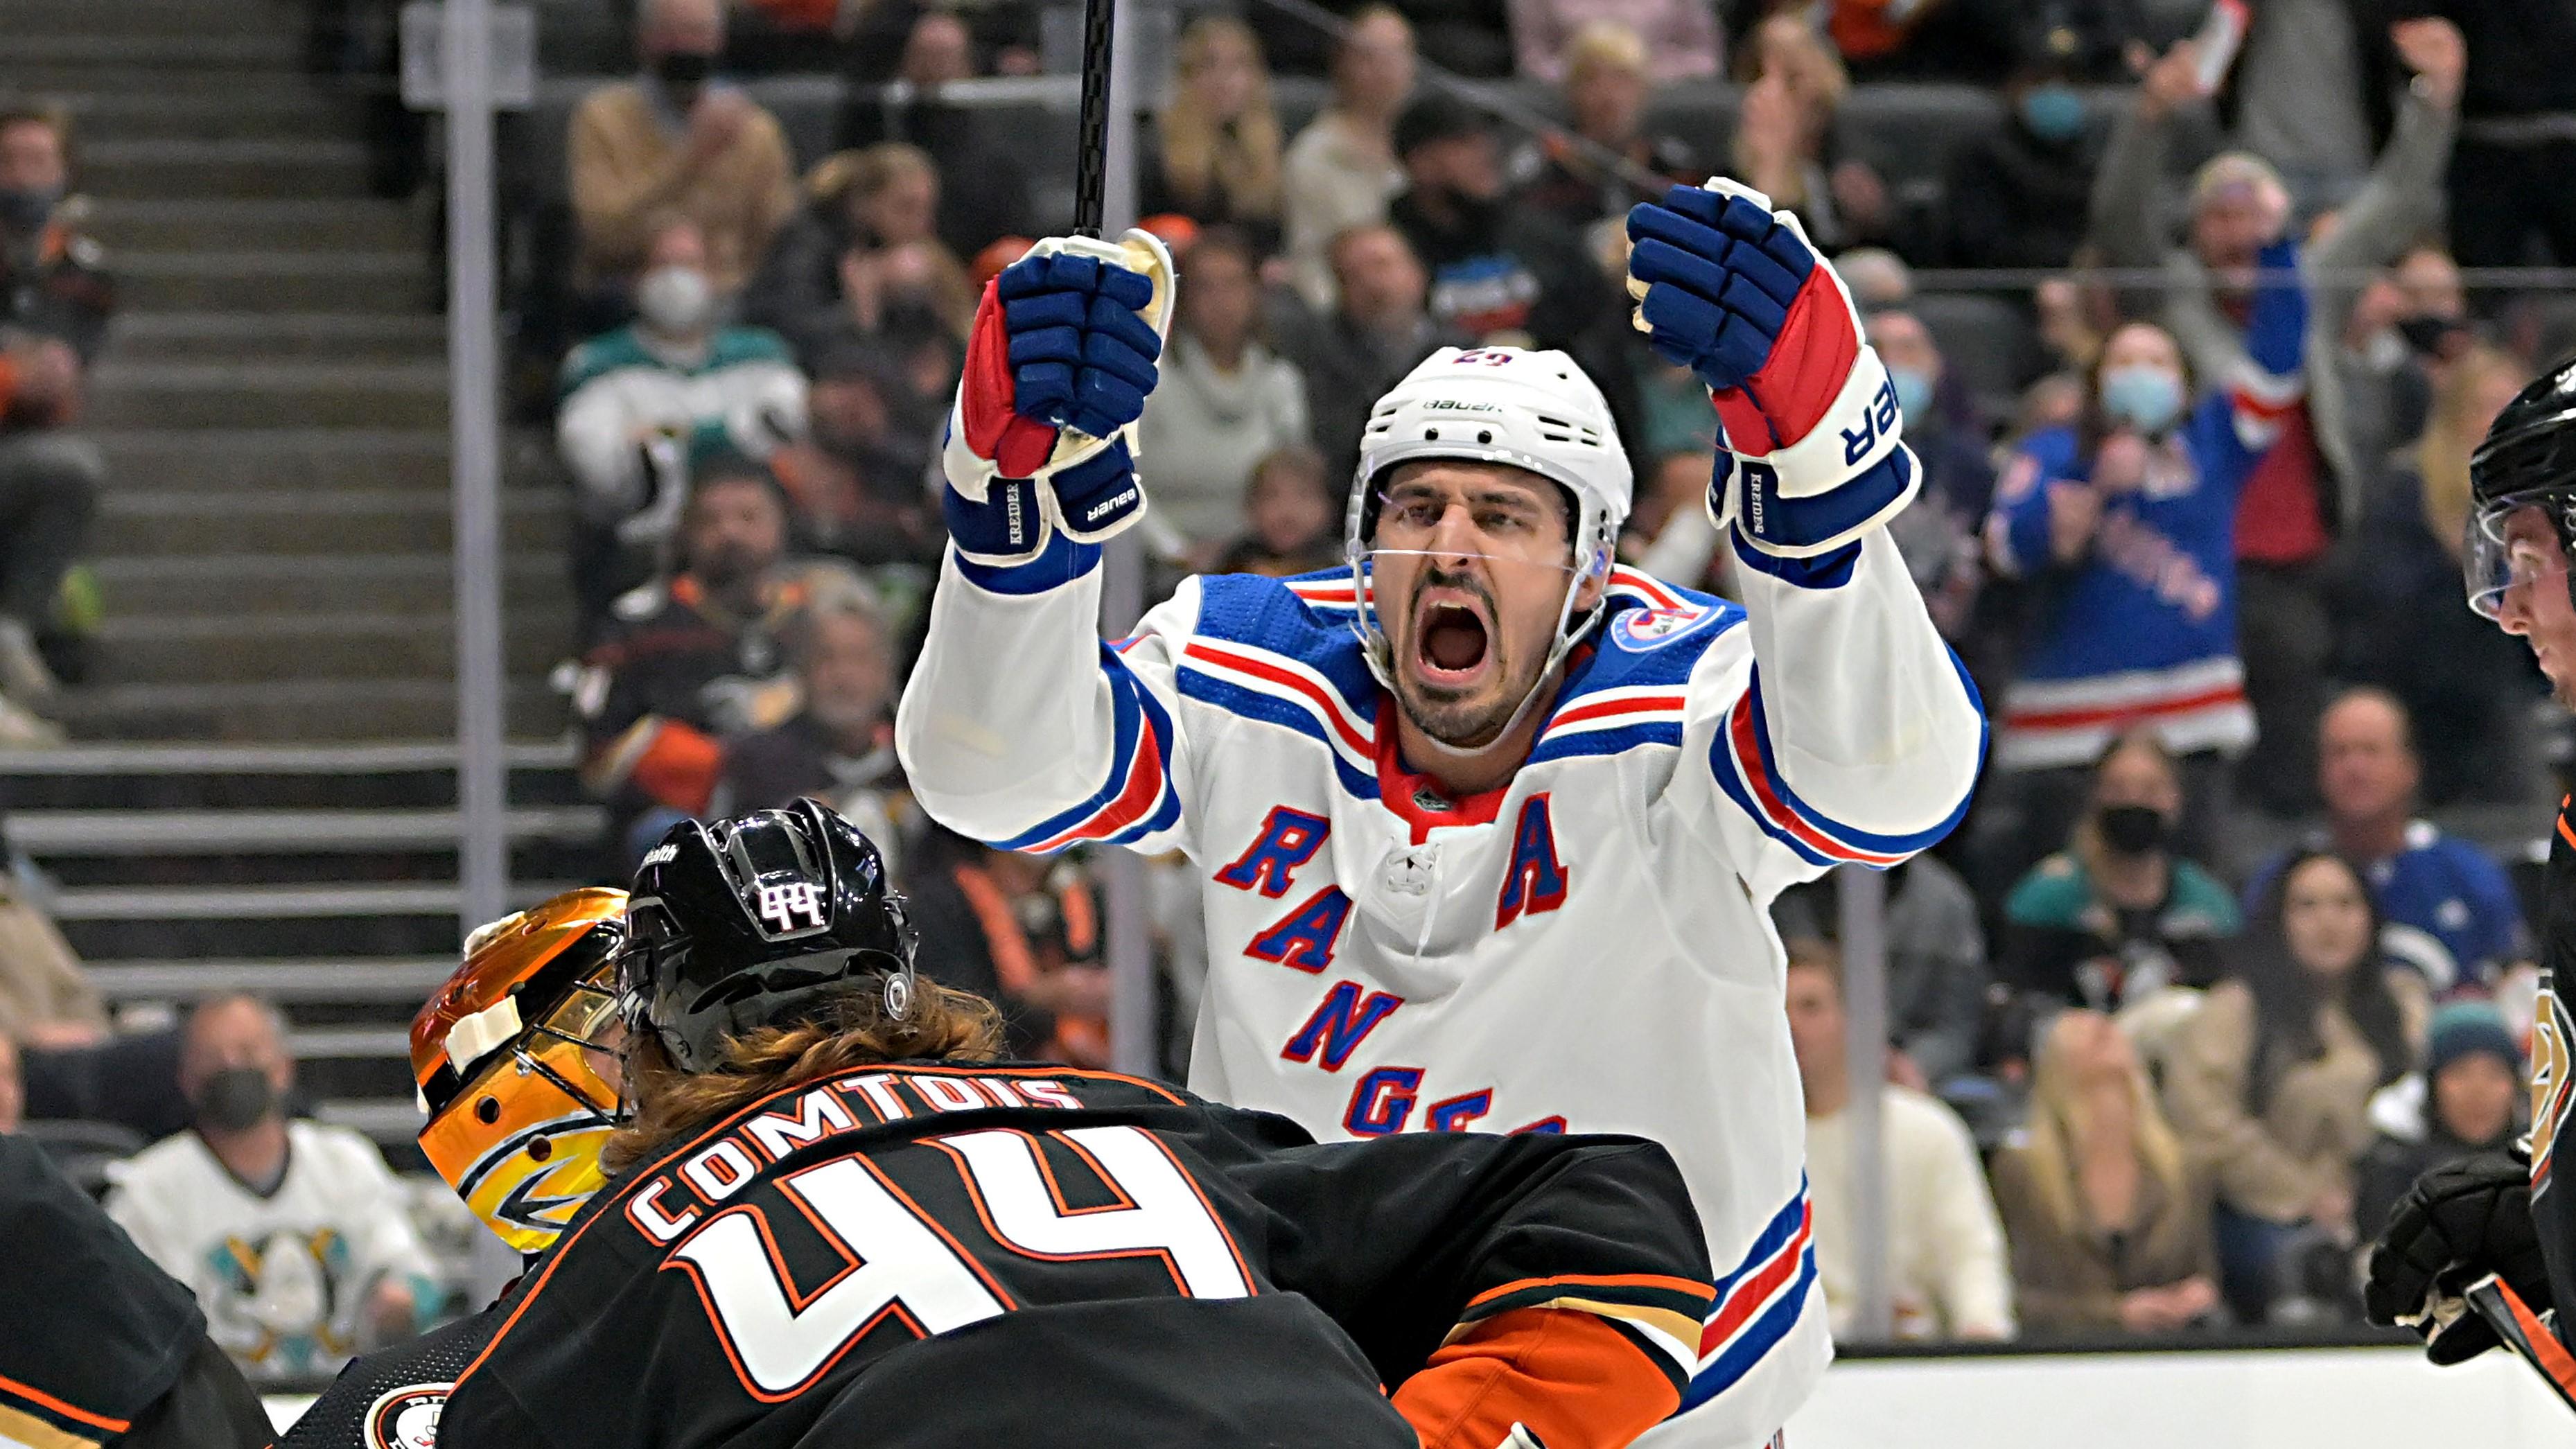 Jan 8, 2022; Anaheim, California, USA; New York Rangers left wing Chris Kreider (20) celebrates after a goal against the Anaheim Ducks in the second period at Honda Center. / Jayne Kamin-Oncea-USA TODAY Sports